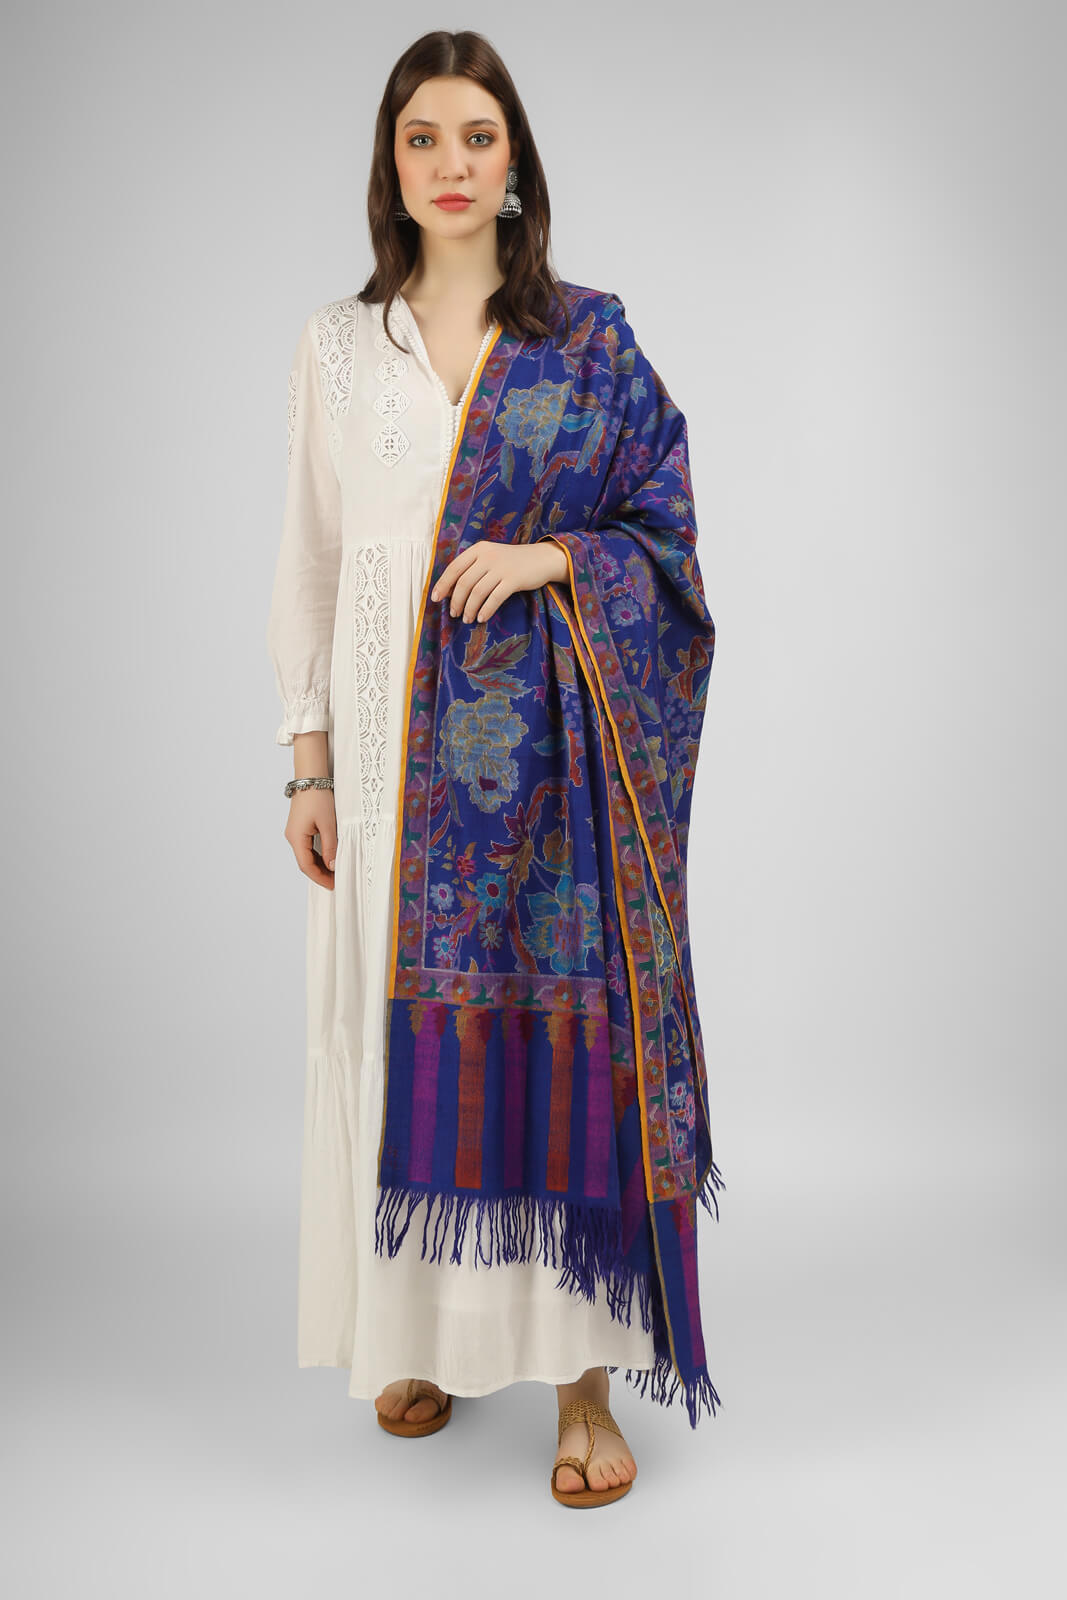 This stunning royal blue Kani shawl features a big floral design that is both intricate and eye-catching. Expertly crafted by skilled artisans, this shawl is made using the traditional Kani weaving technique, which has been passed down for generations. The shawl is made from high-quality pashmina  wool .